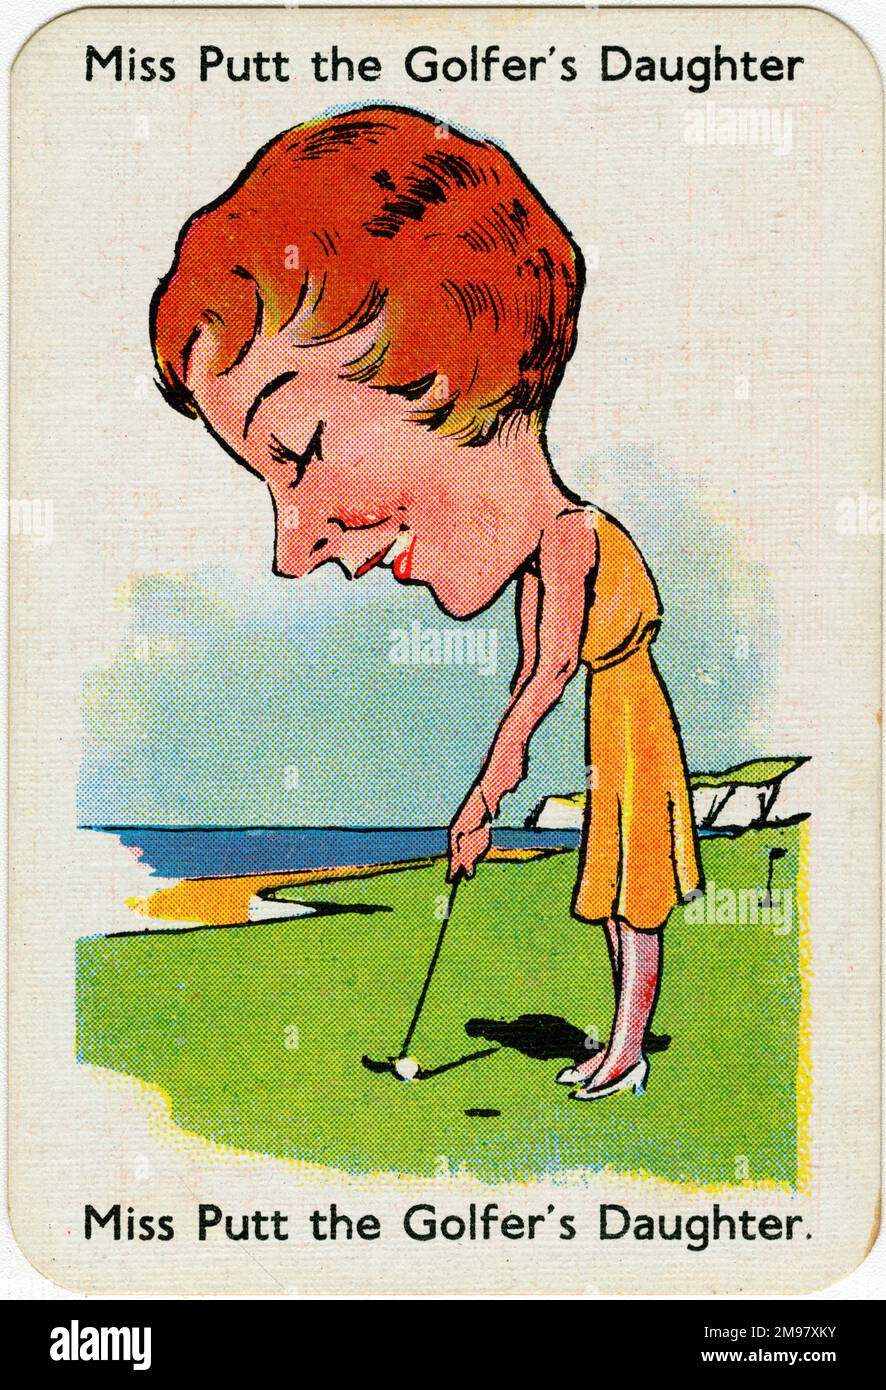 Happy Families Playing Cards - Miss Putt the Golfer's Daughter. Stock Photo